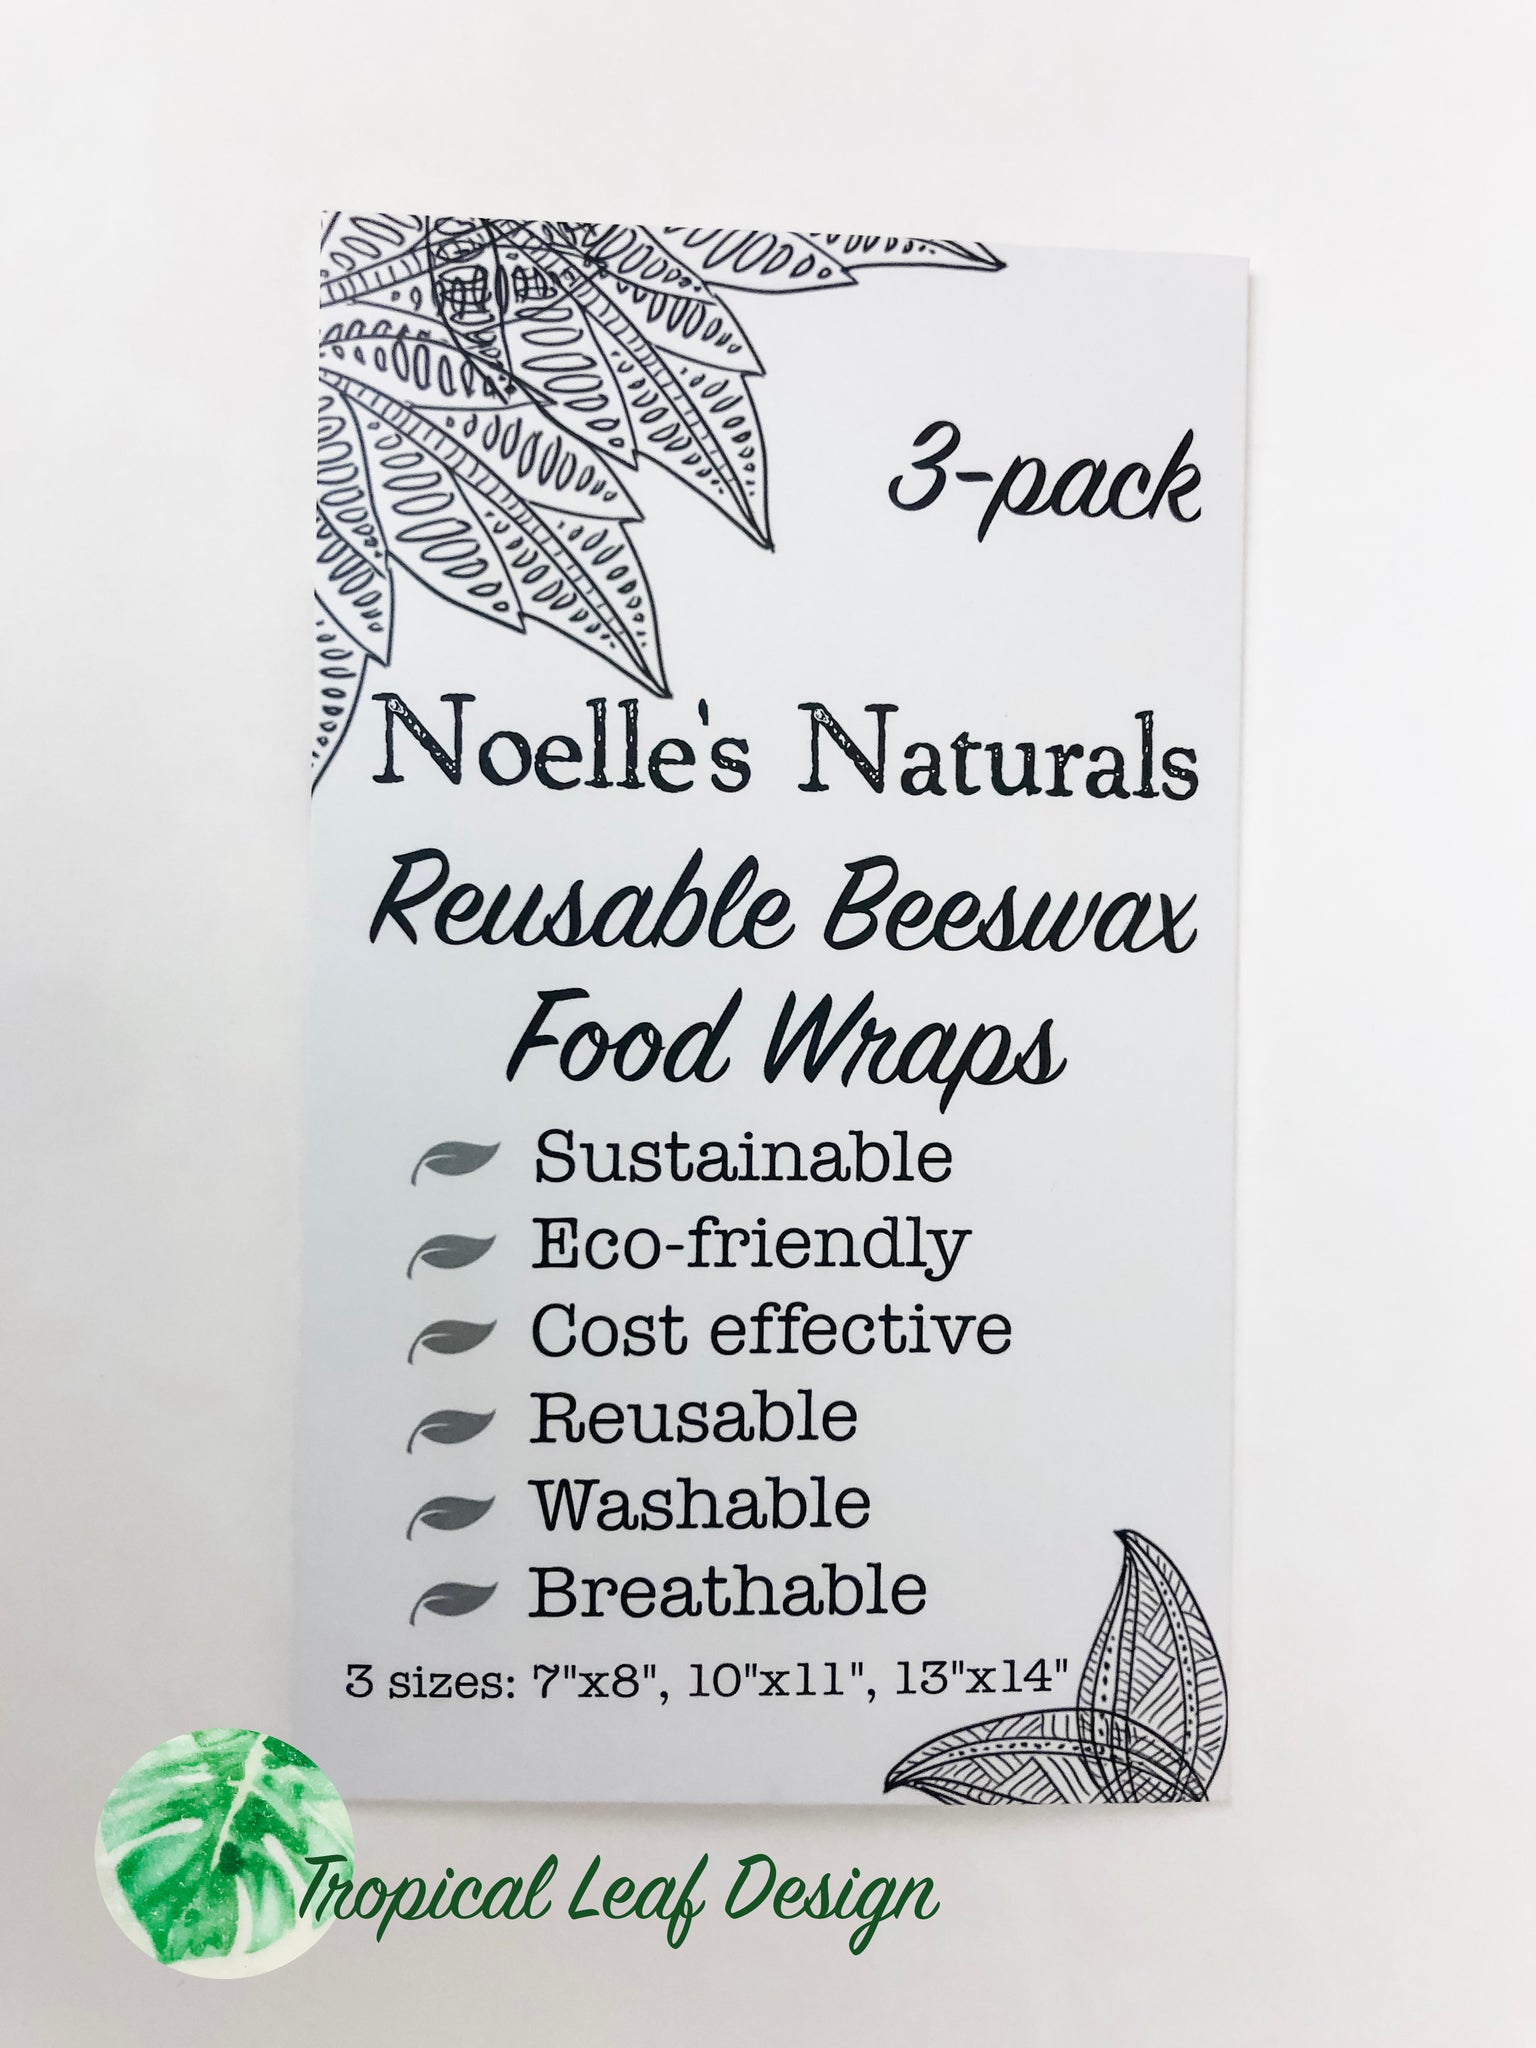 Organic Beeswax Food Wrap Covers - Set of 3 - Tropical Leaf